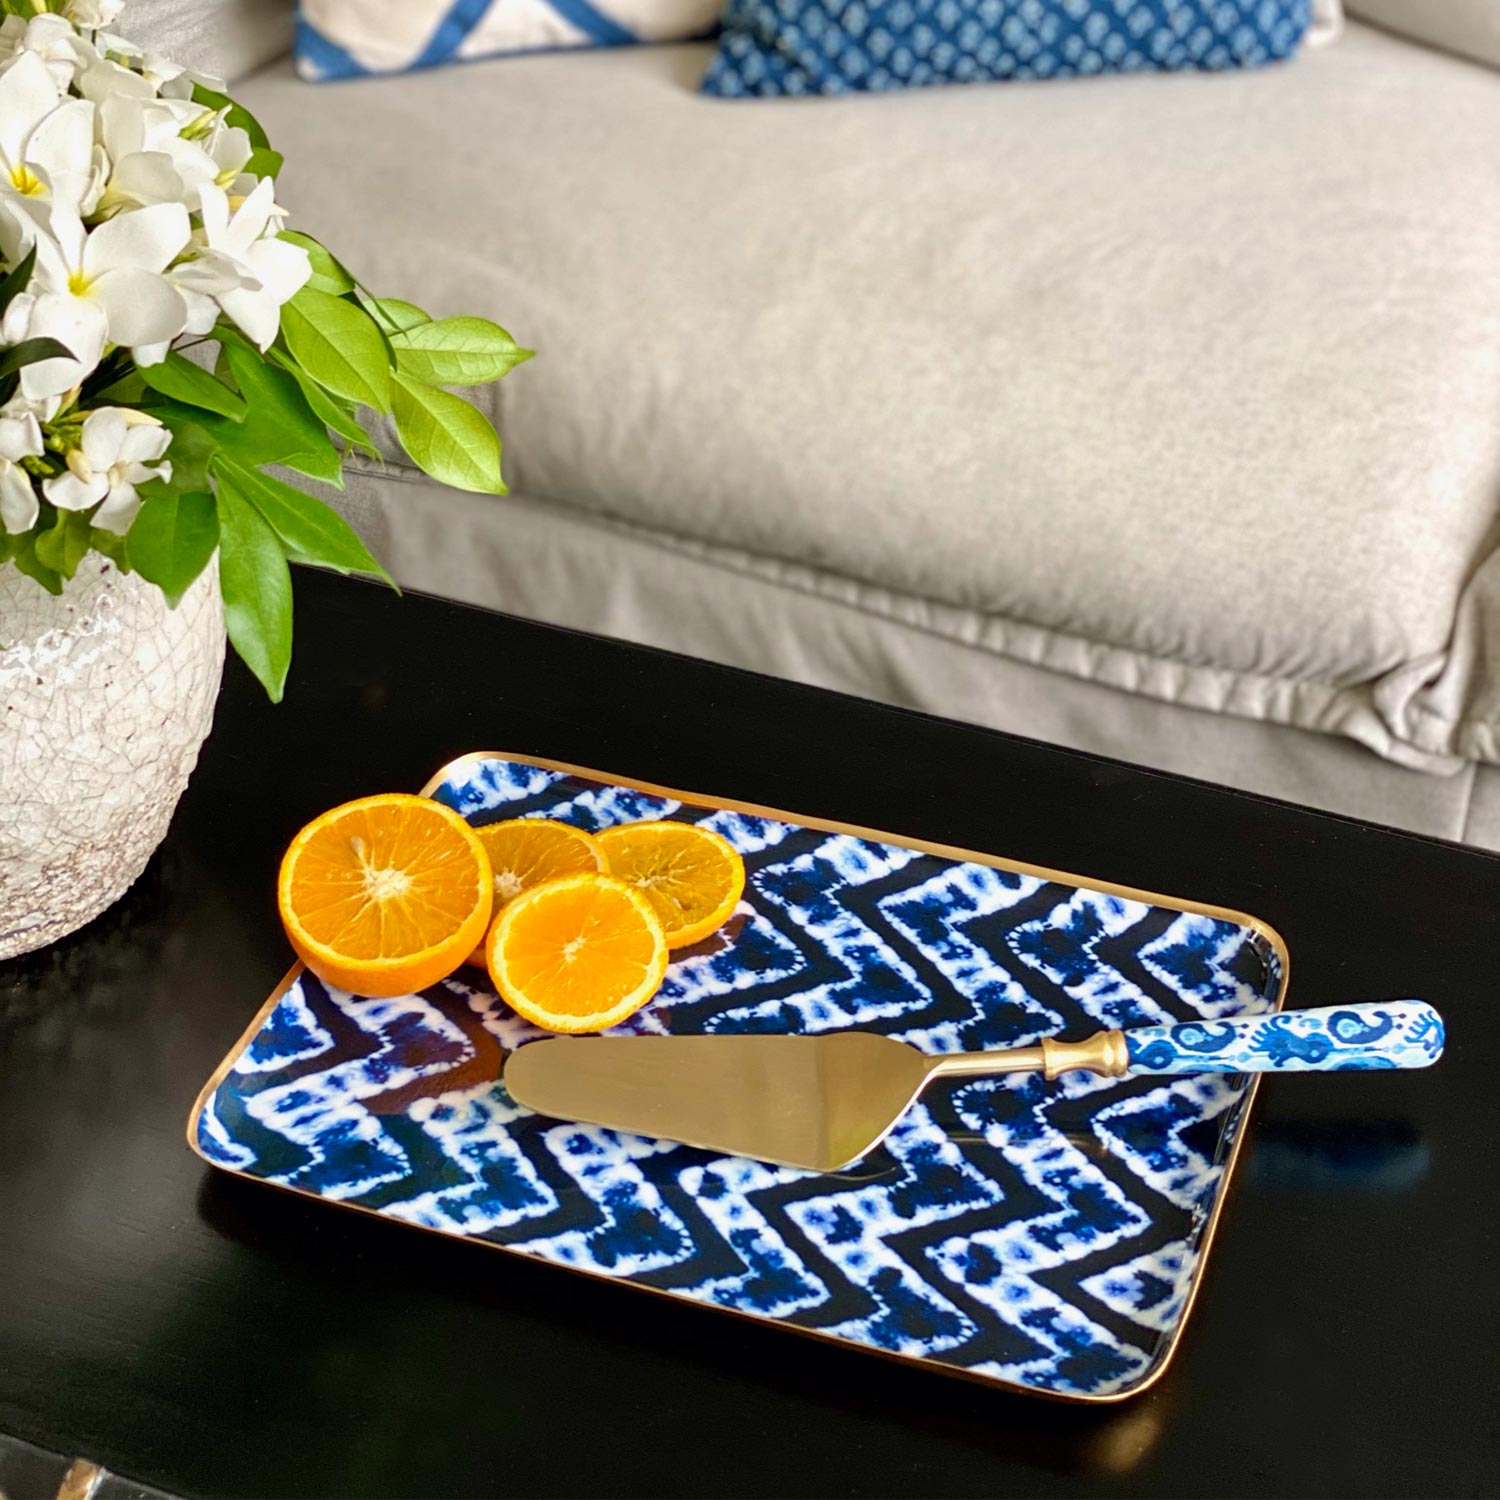 Serving Platters with Server, Gift Set of 4 - Bali Island